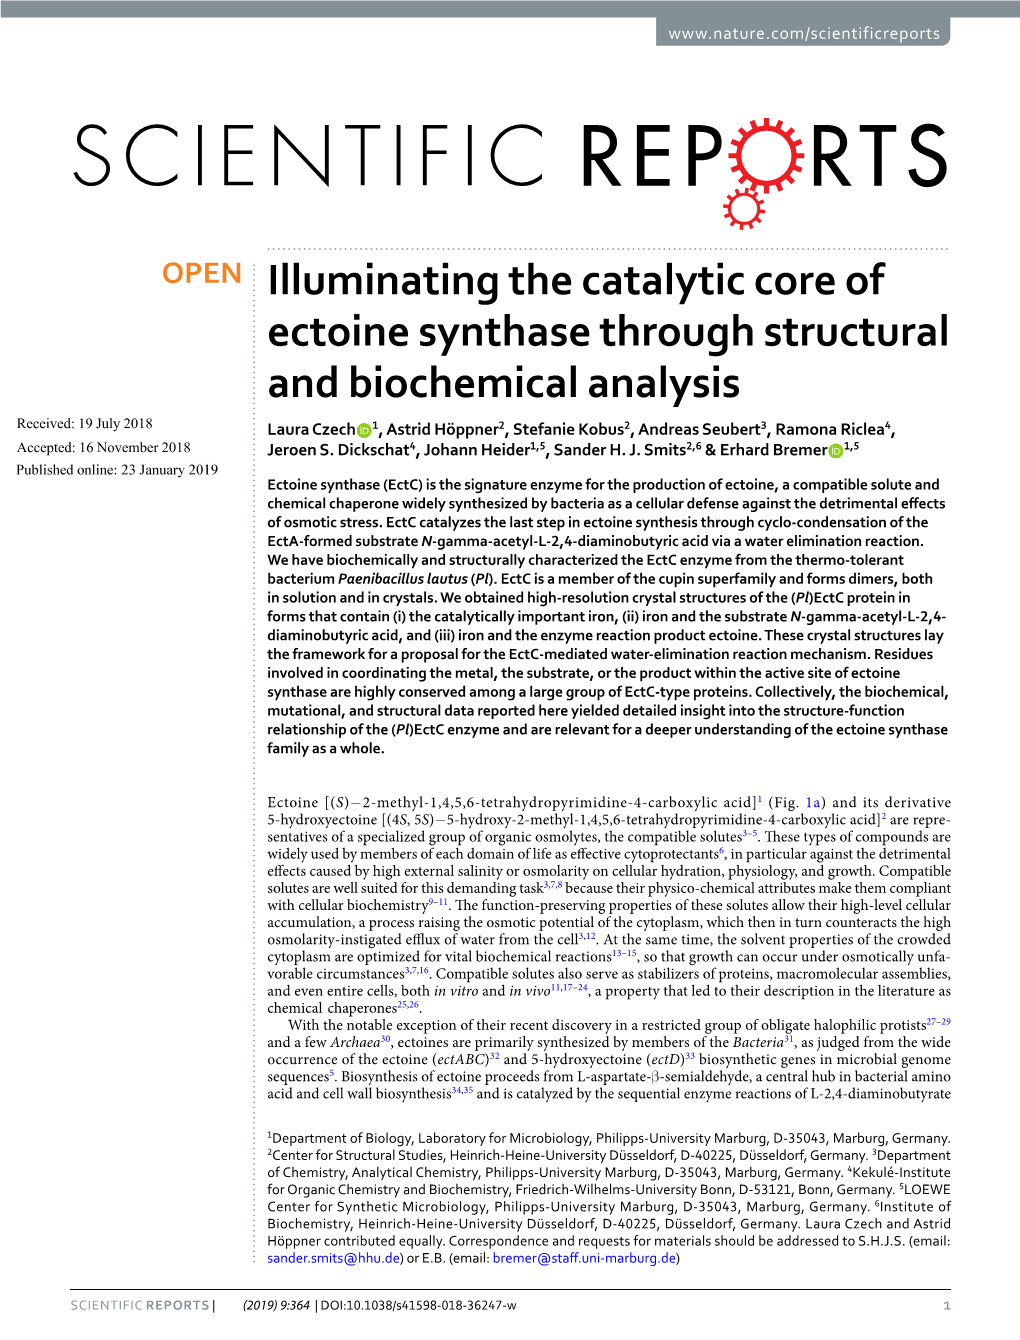 Illuminating the Catalytic Core of Ectoine Synthase Through Structural